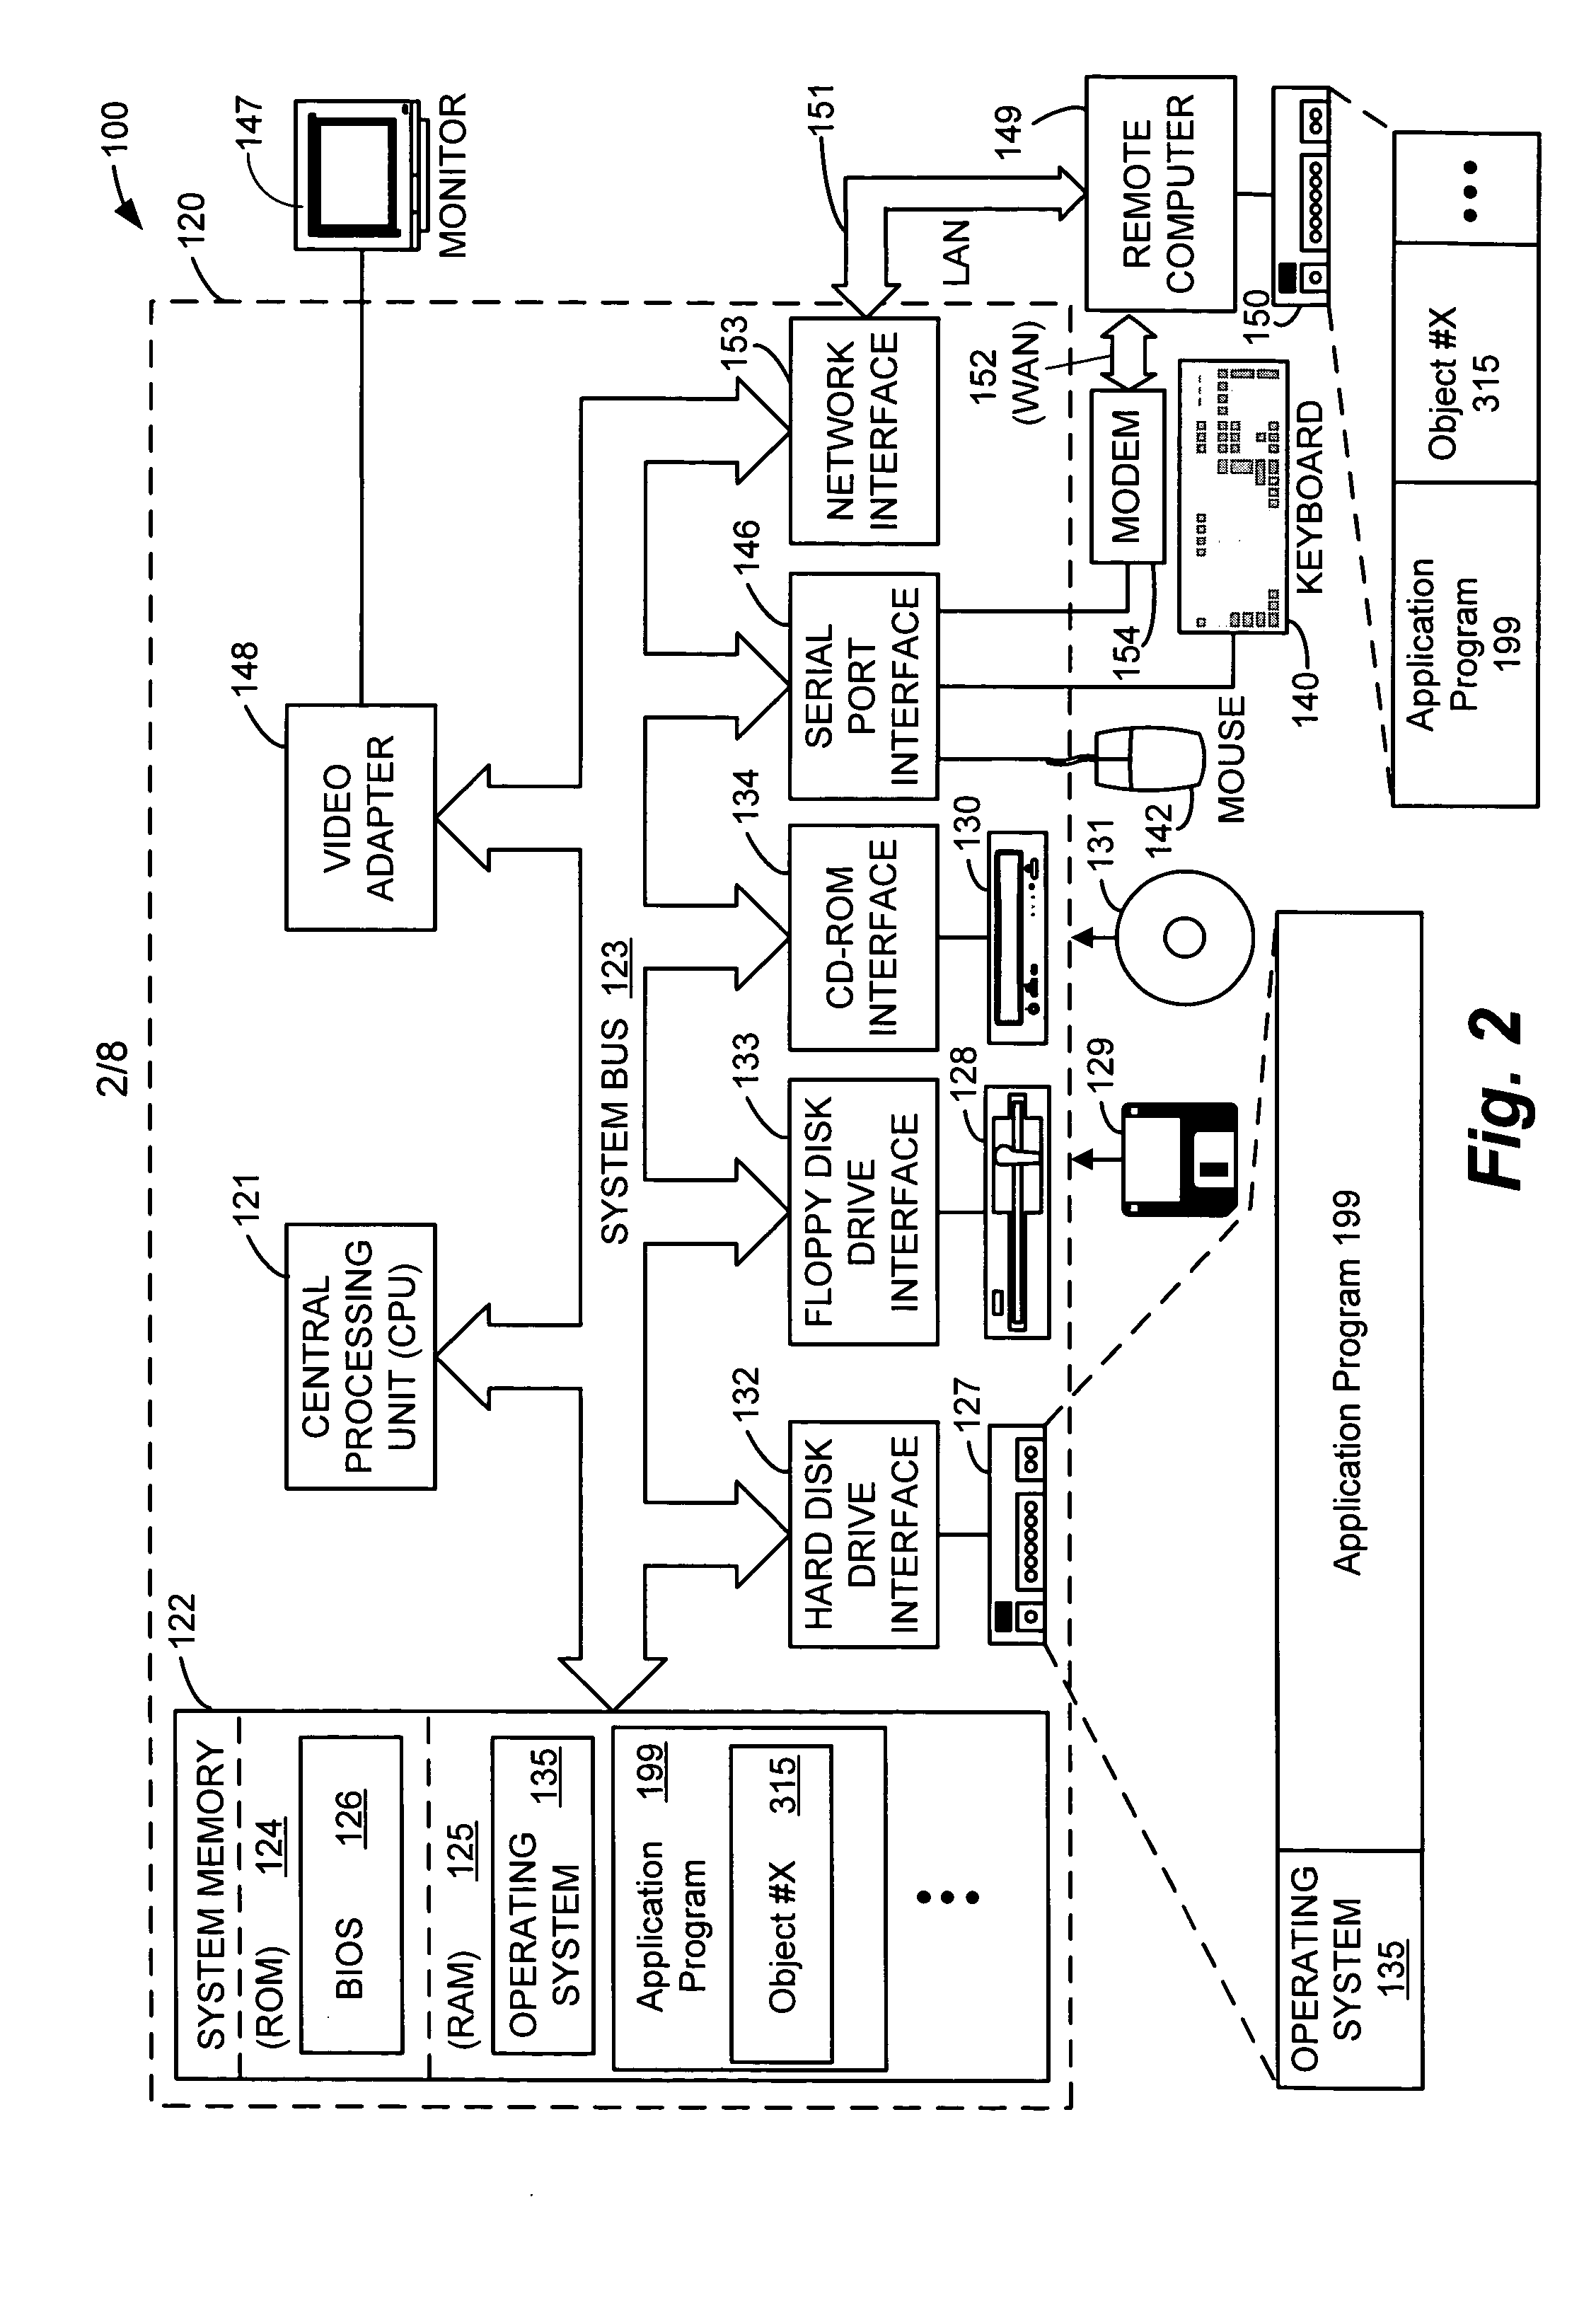 System and method for sharing objects between computers over a network